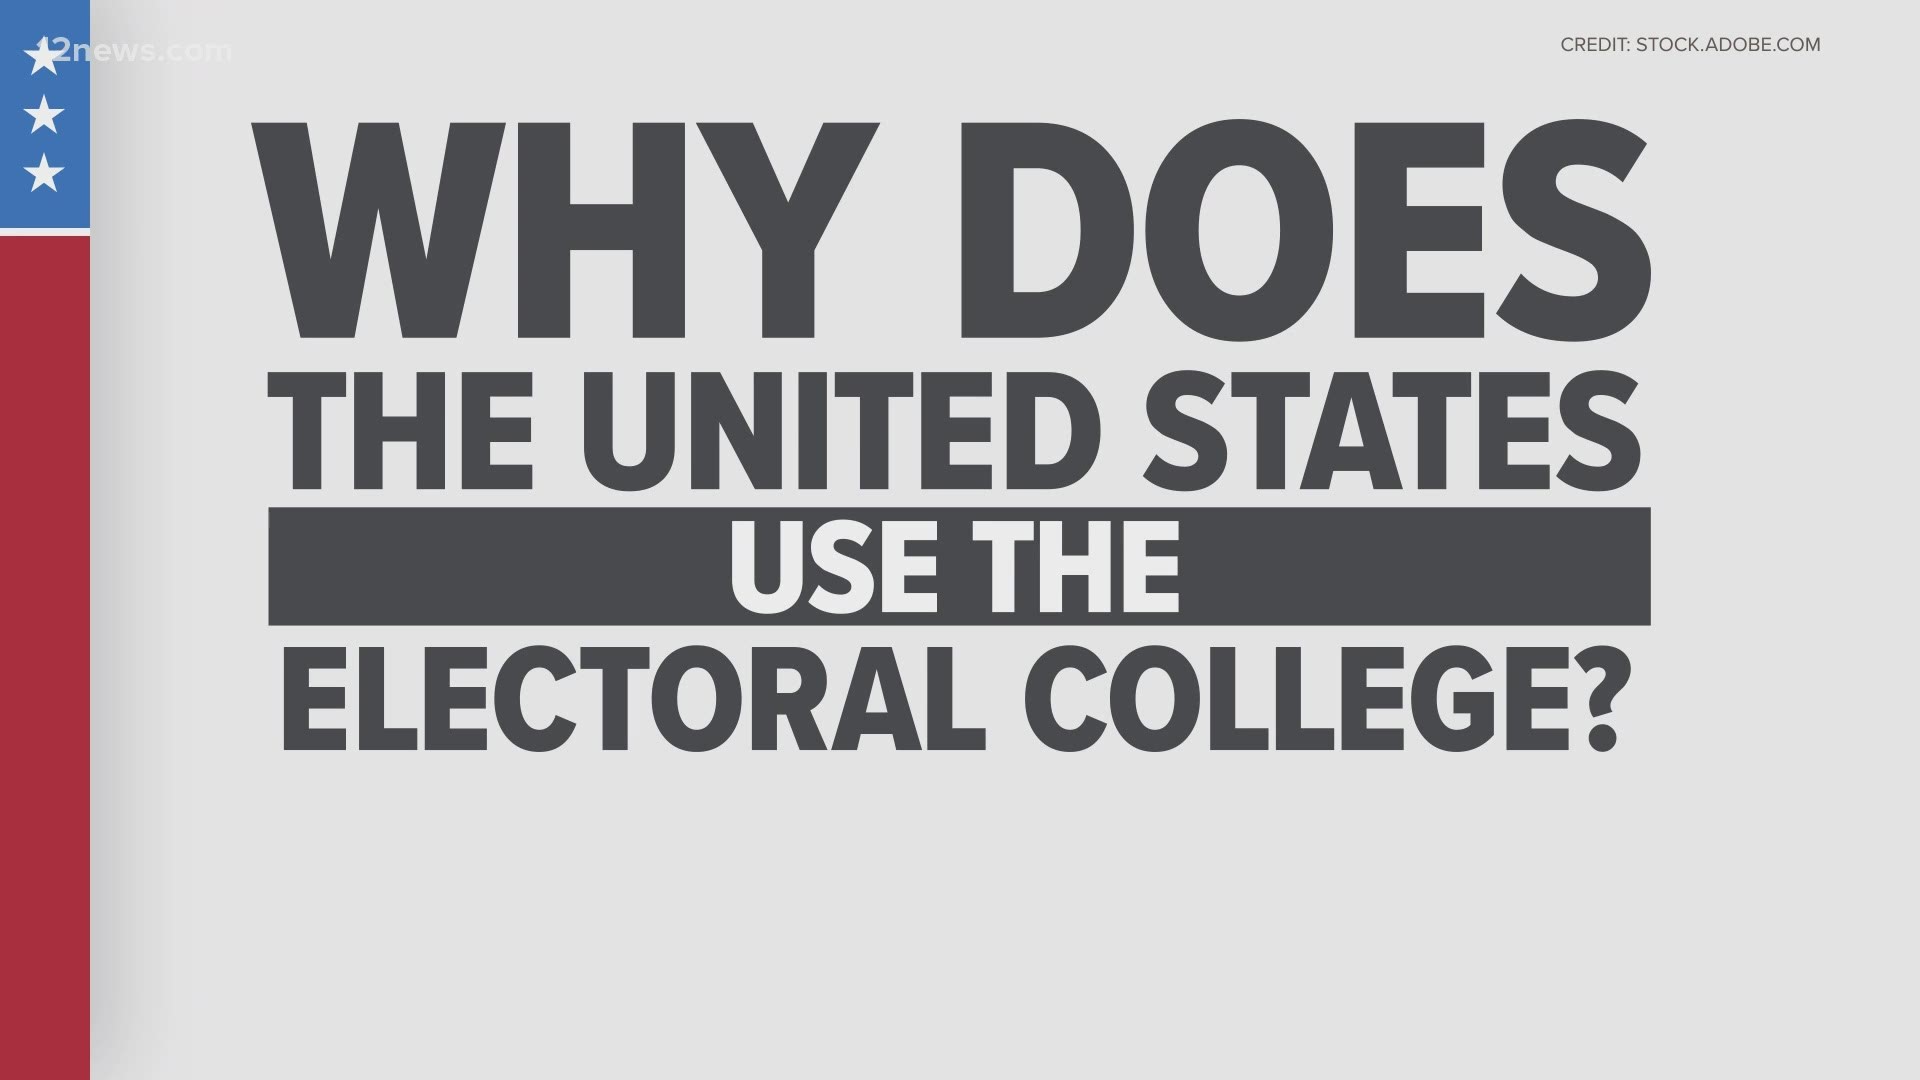 One of the most confusing and controversial parts of our election system is the Electoral College. So, how does it work and why do we have it?